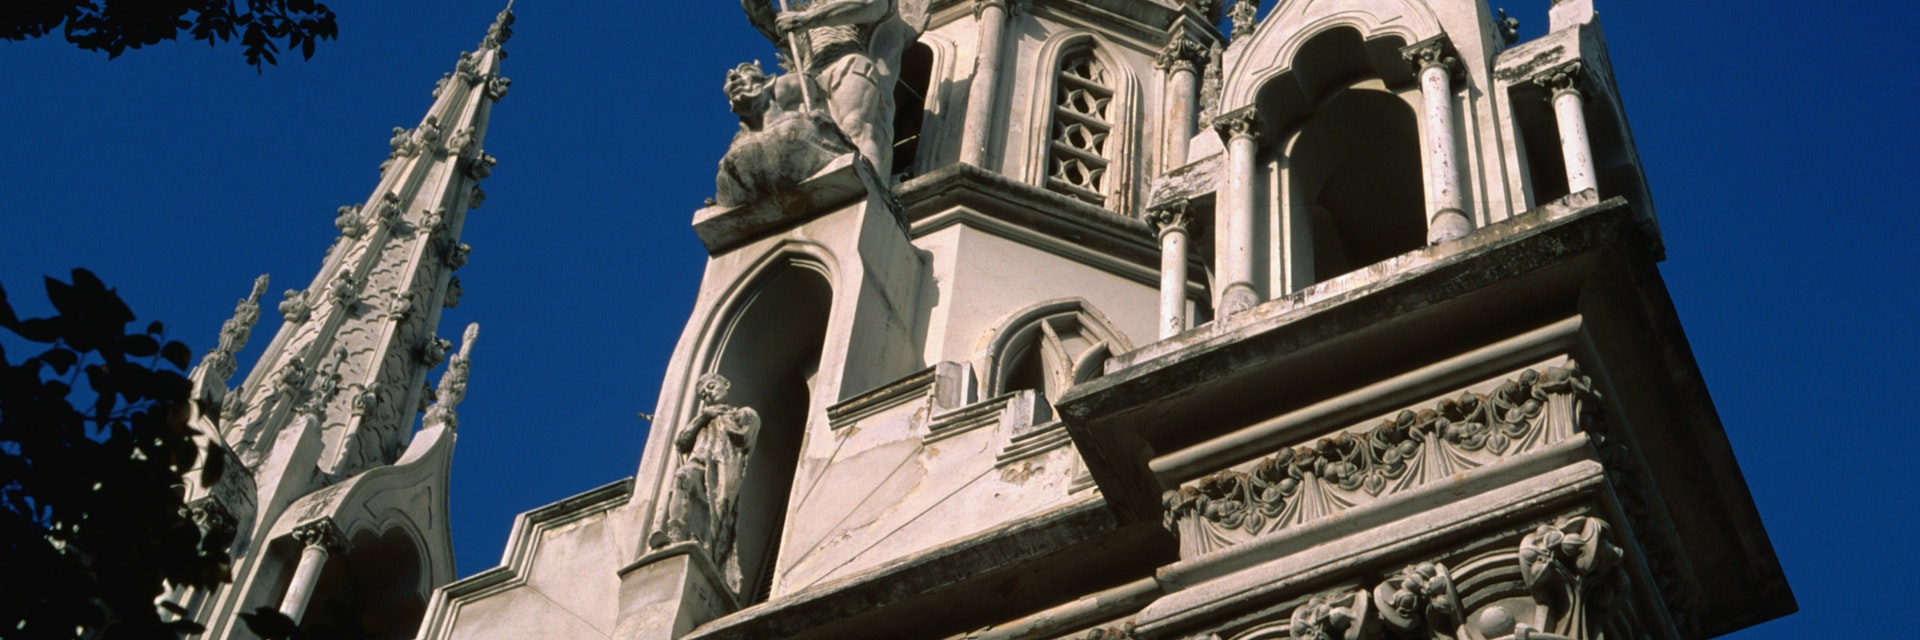 Oblique view of the facade and spires of the Santa Capilla in the old town of Caracas. This Neo-Gothic chapel was commenced in 1883 and was modelled on Sainte Chapelle of Paris.